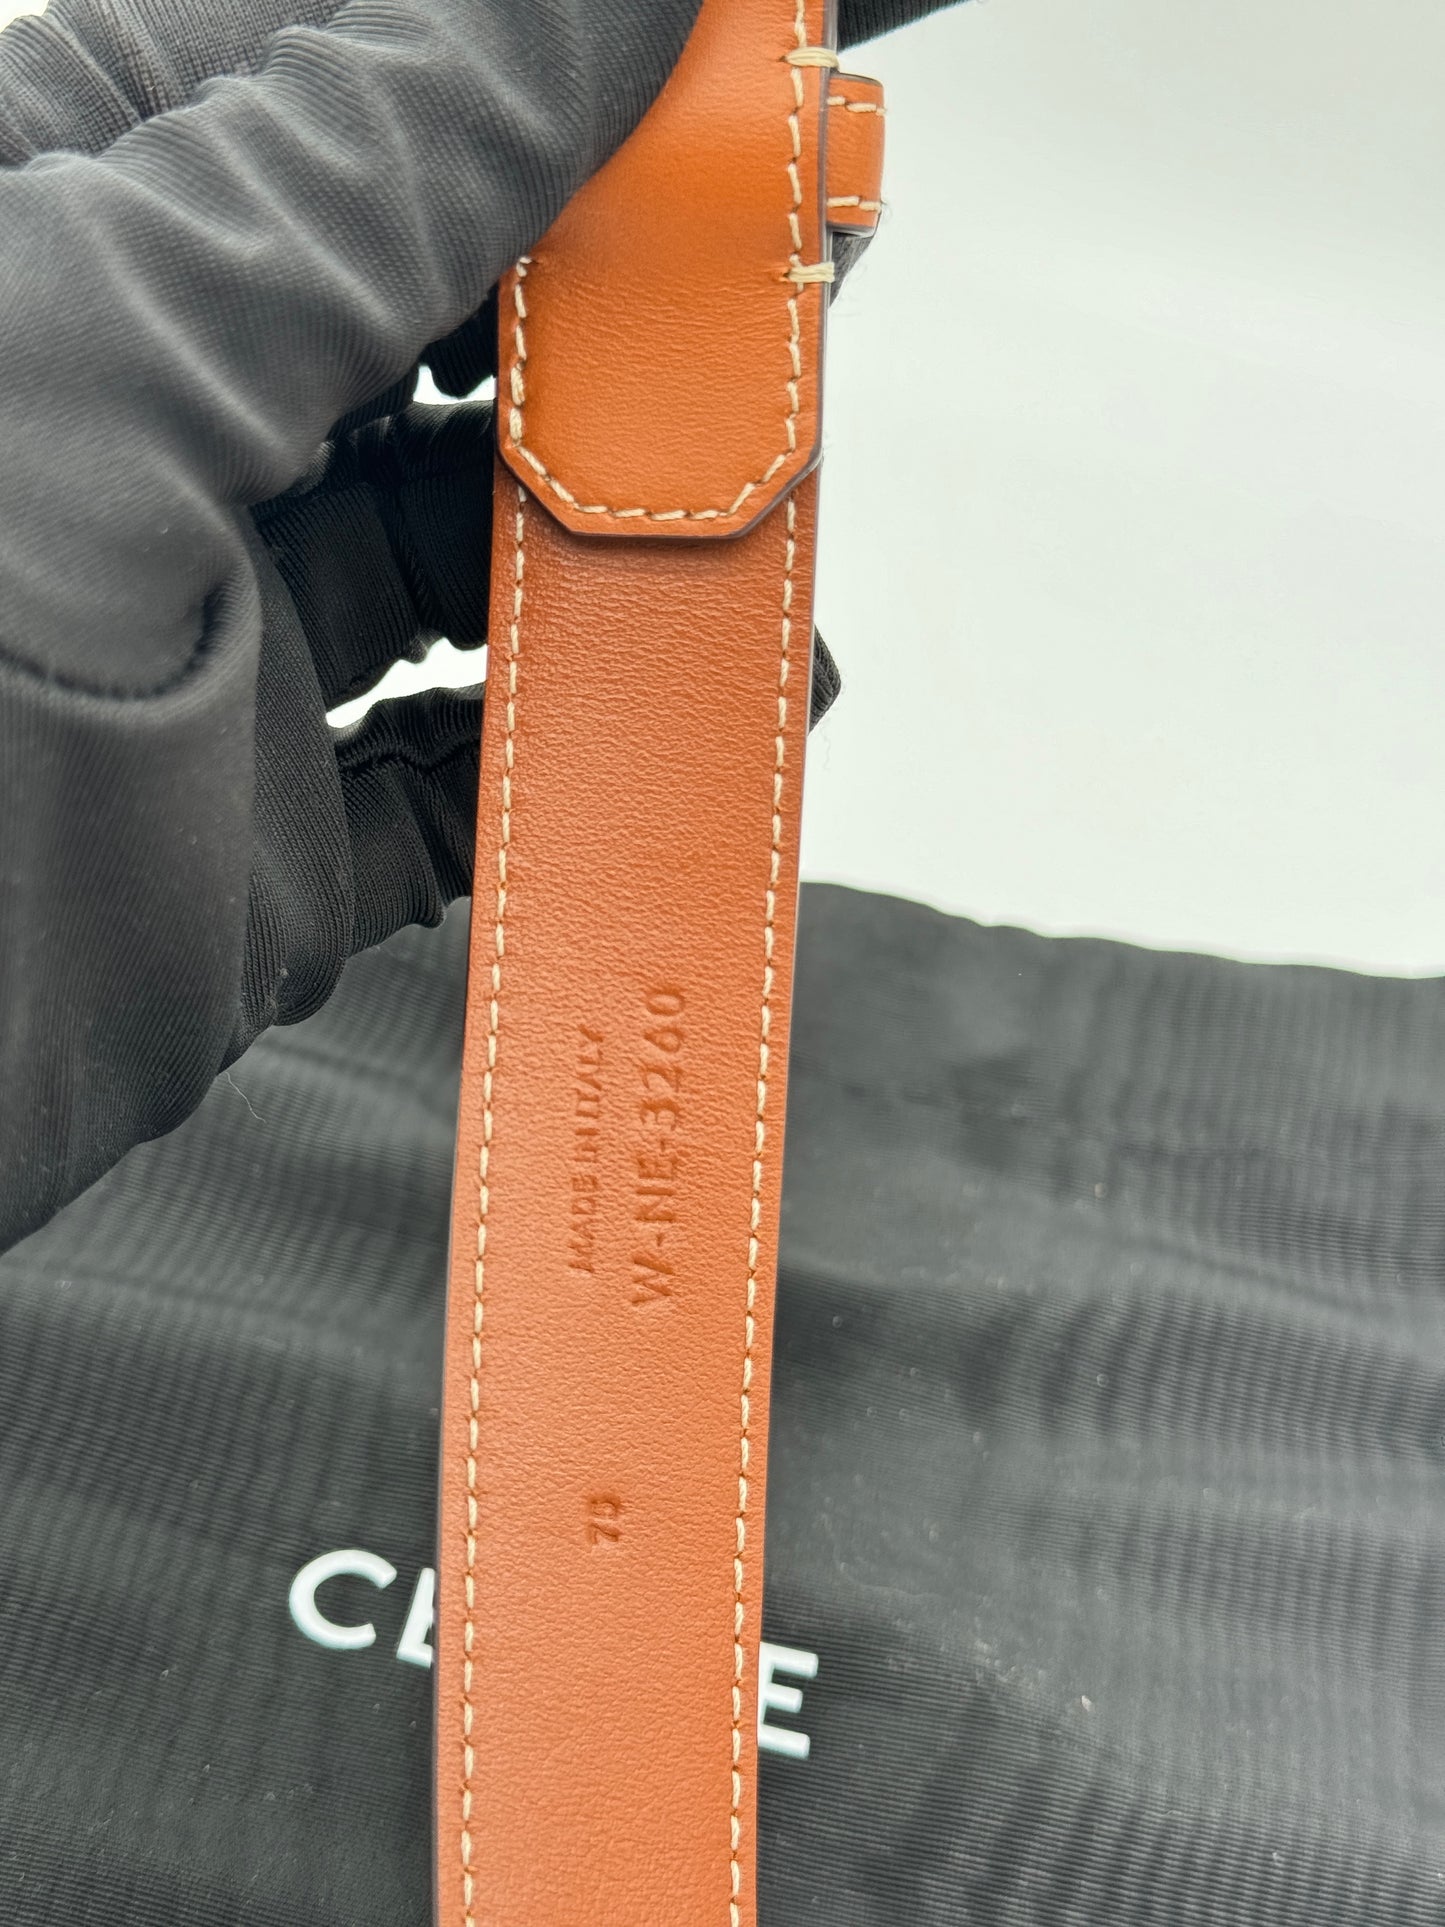 CELINE SMALL TRIOMPHE BELT IN LEATHER BROWN 80